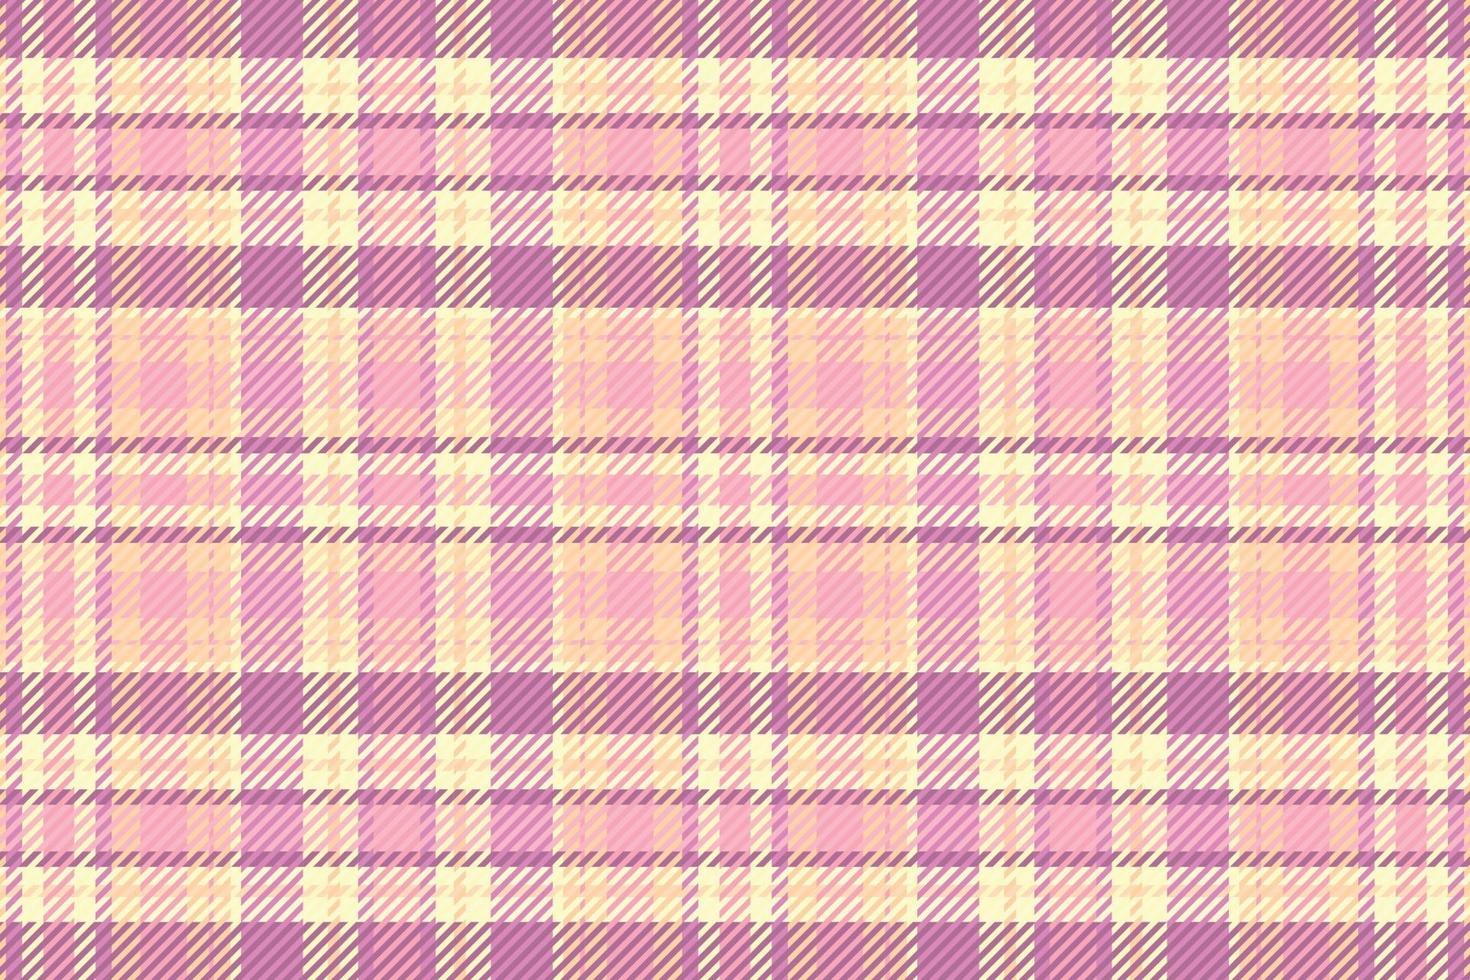 Tartan plaid pattern with texture and warm color. vector